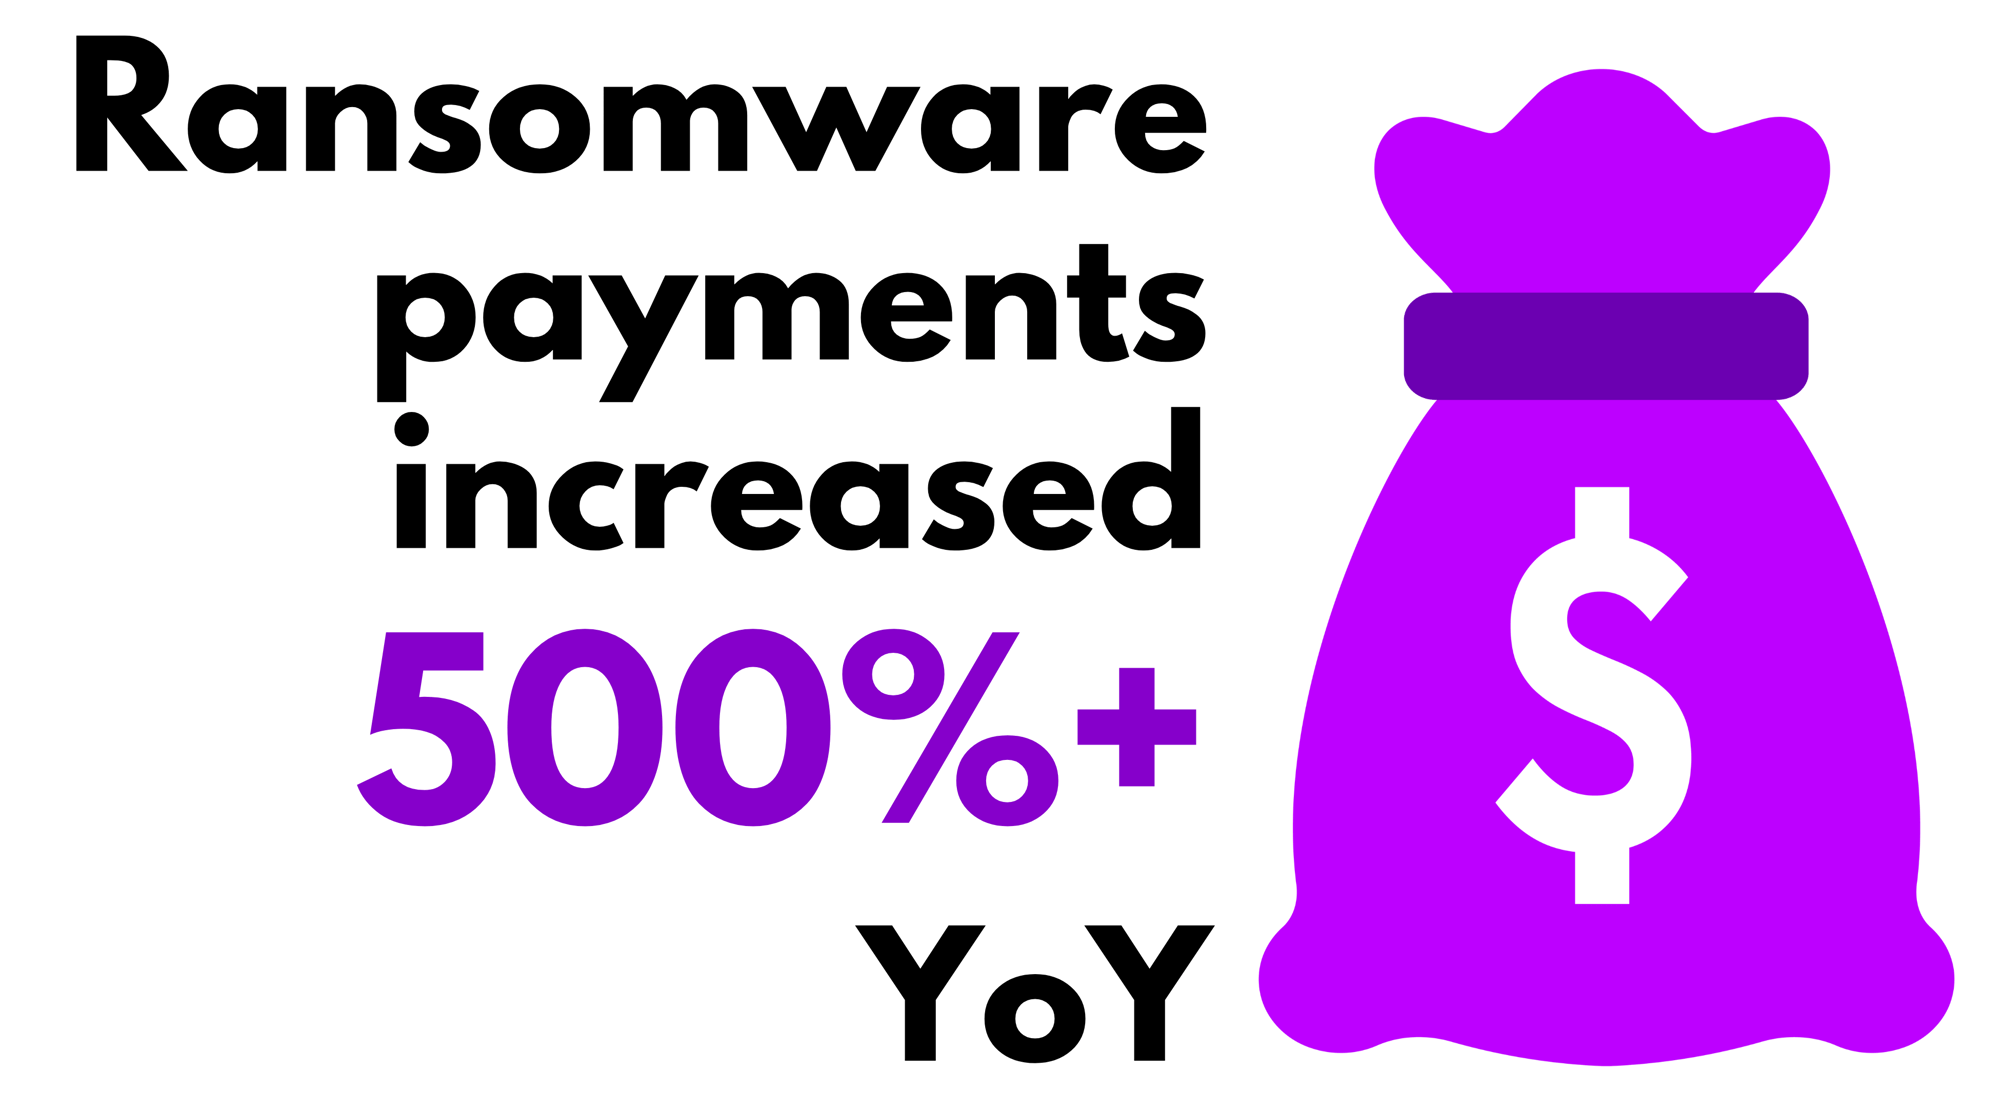 Ransomware payments increased 500% YoY